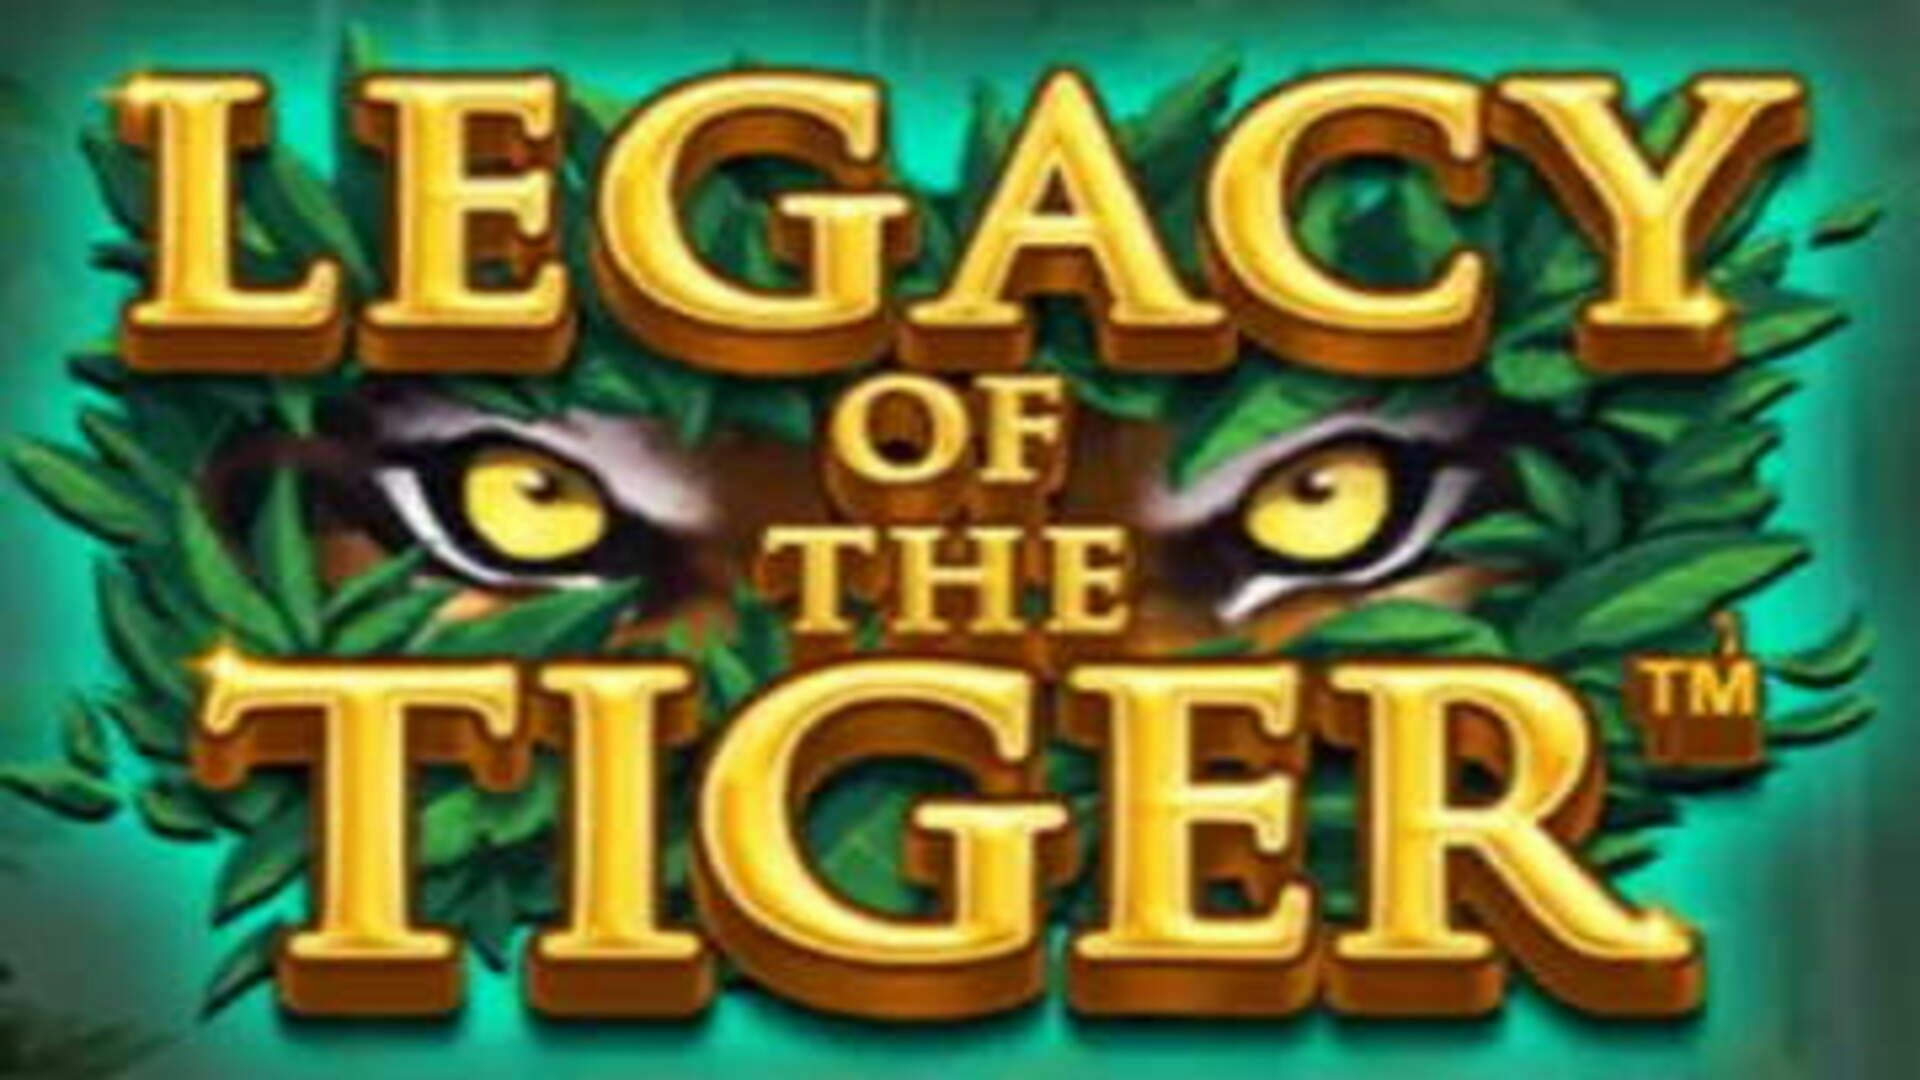 Legacy of the Tiger